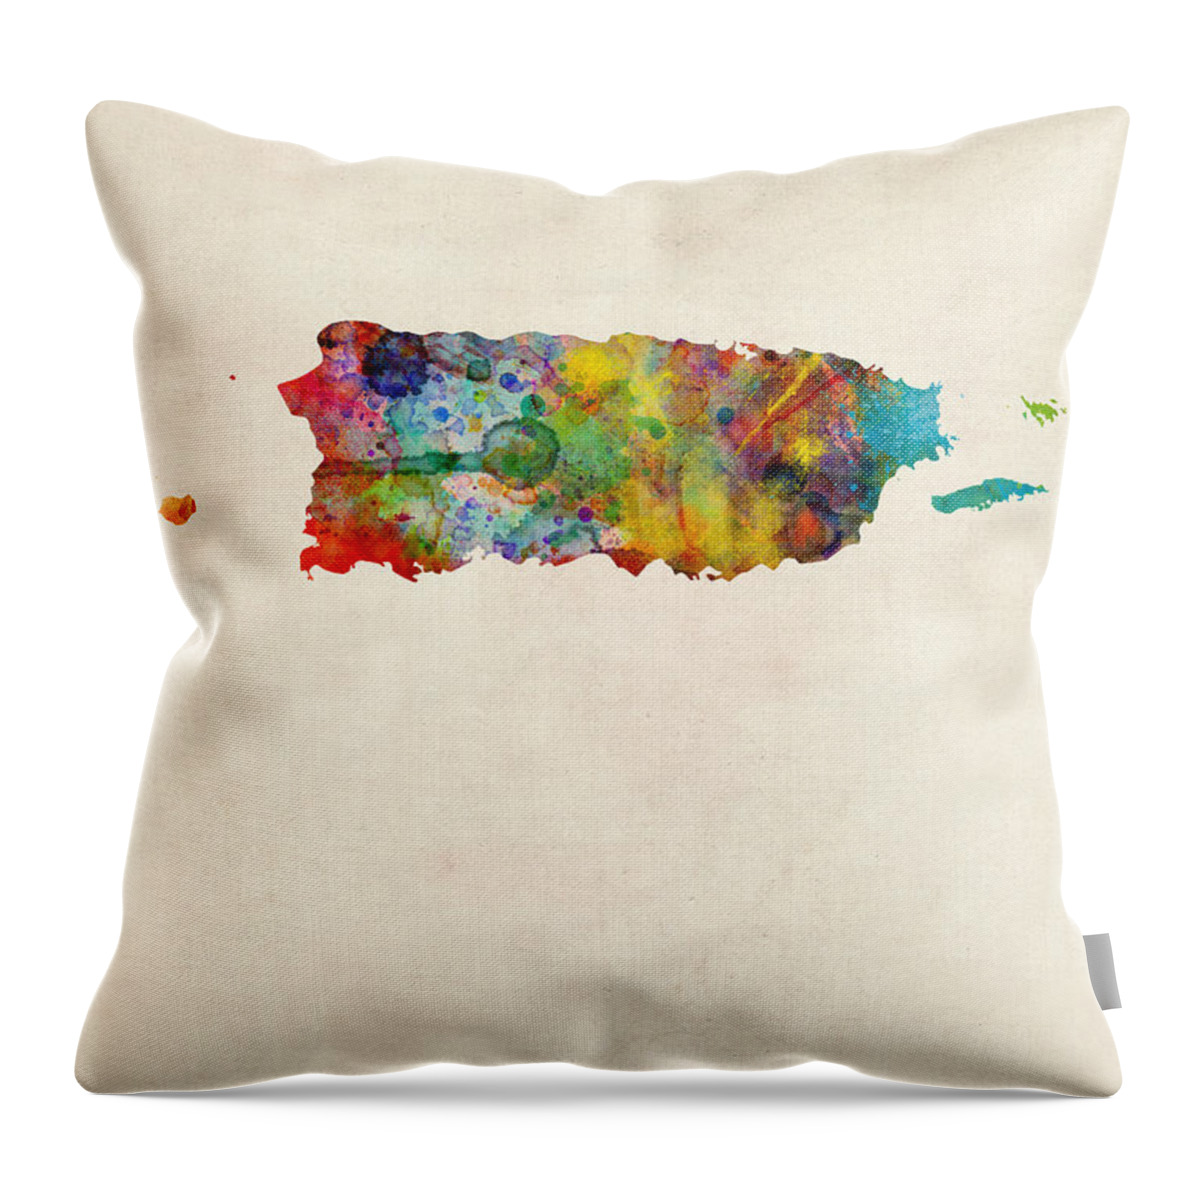 United States Map Throw Pillow featuring the digital art Puerto Rico Watercolor Map by Michael Tompsett